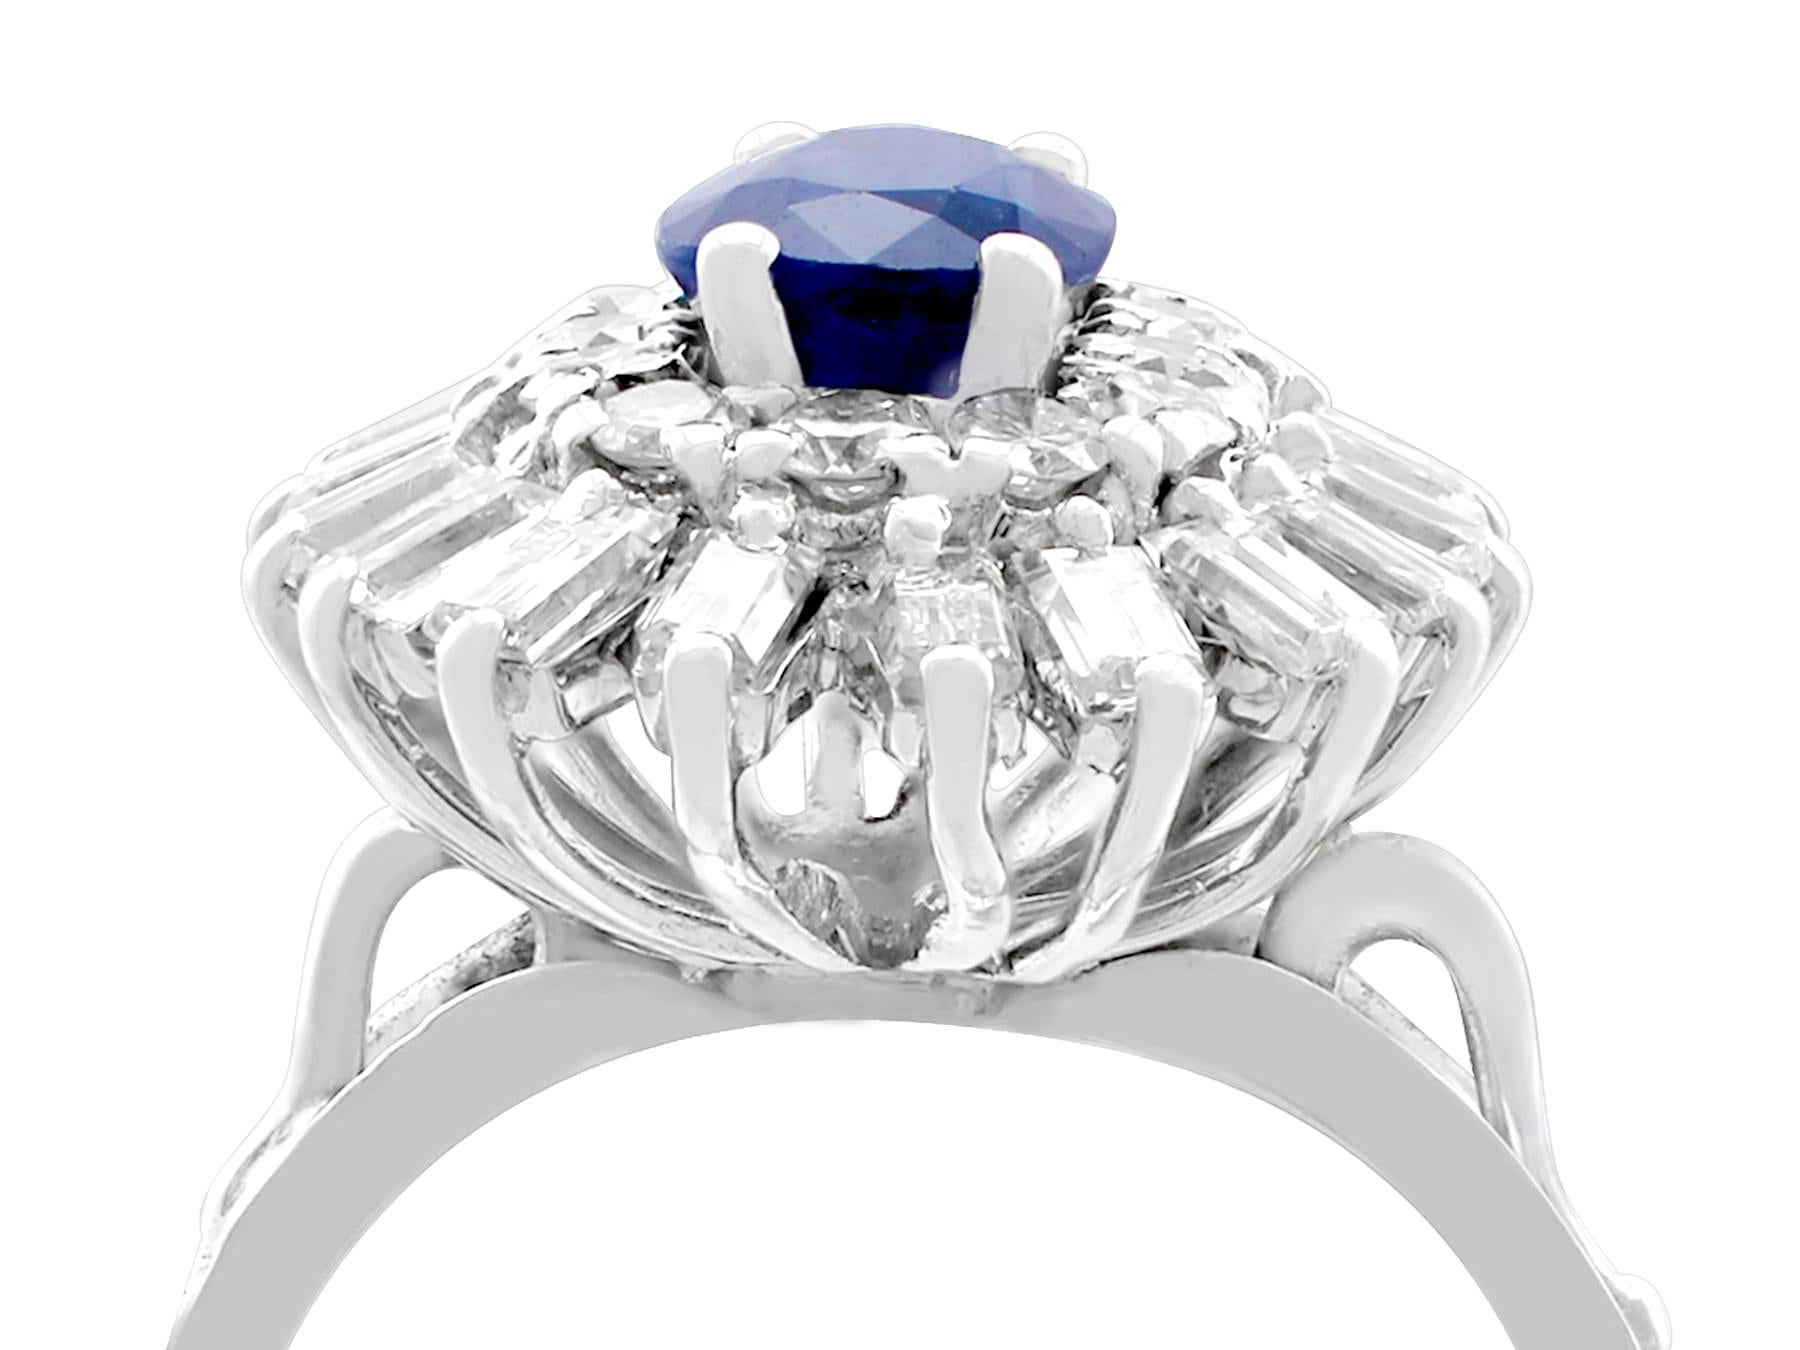 Oval Cut 1.25 Carat Sapphire and 1.15 Carat Diamond White Gold Cocktail Ring For Sale